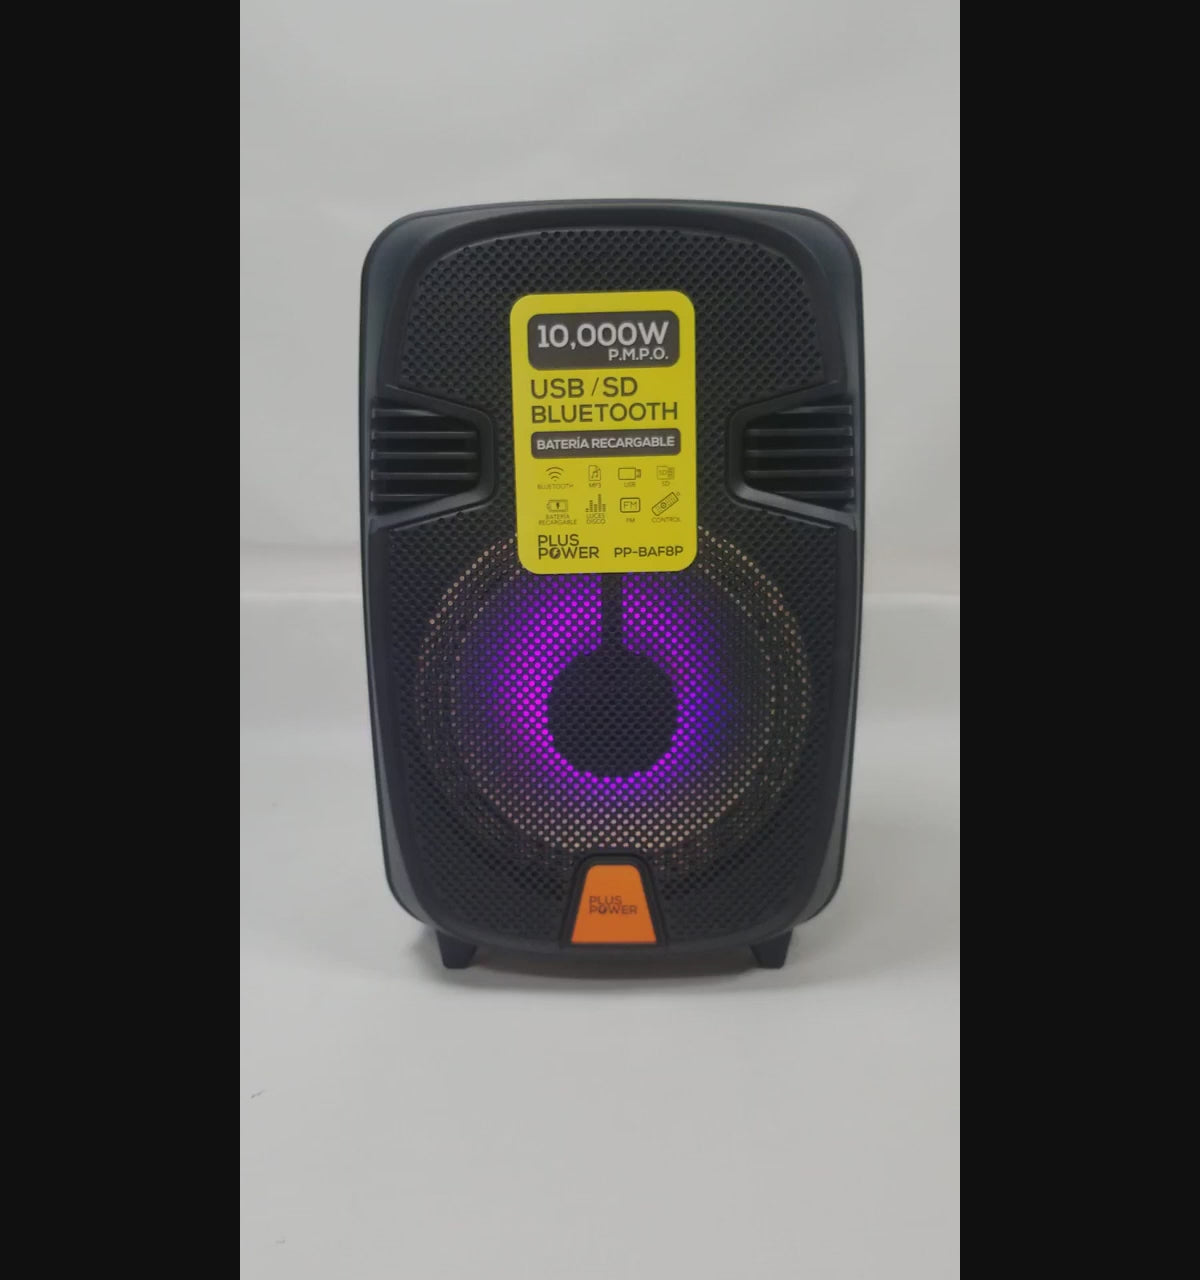 10,000W PERSONAL BLUETOOTH RECHARGEABLE SPEAKER